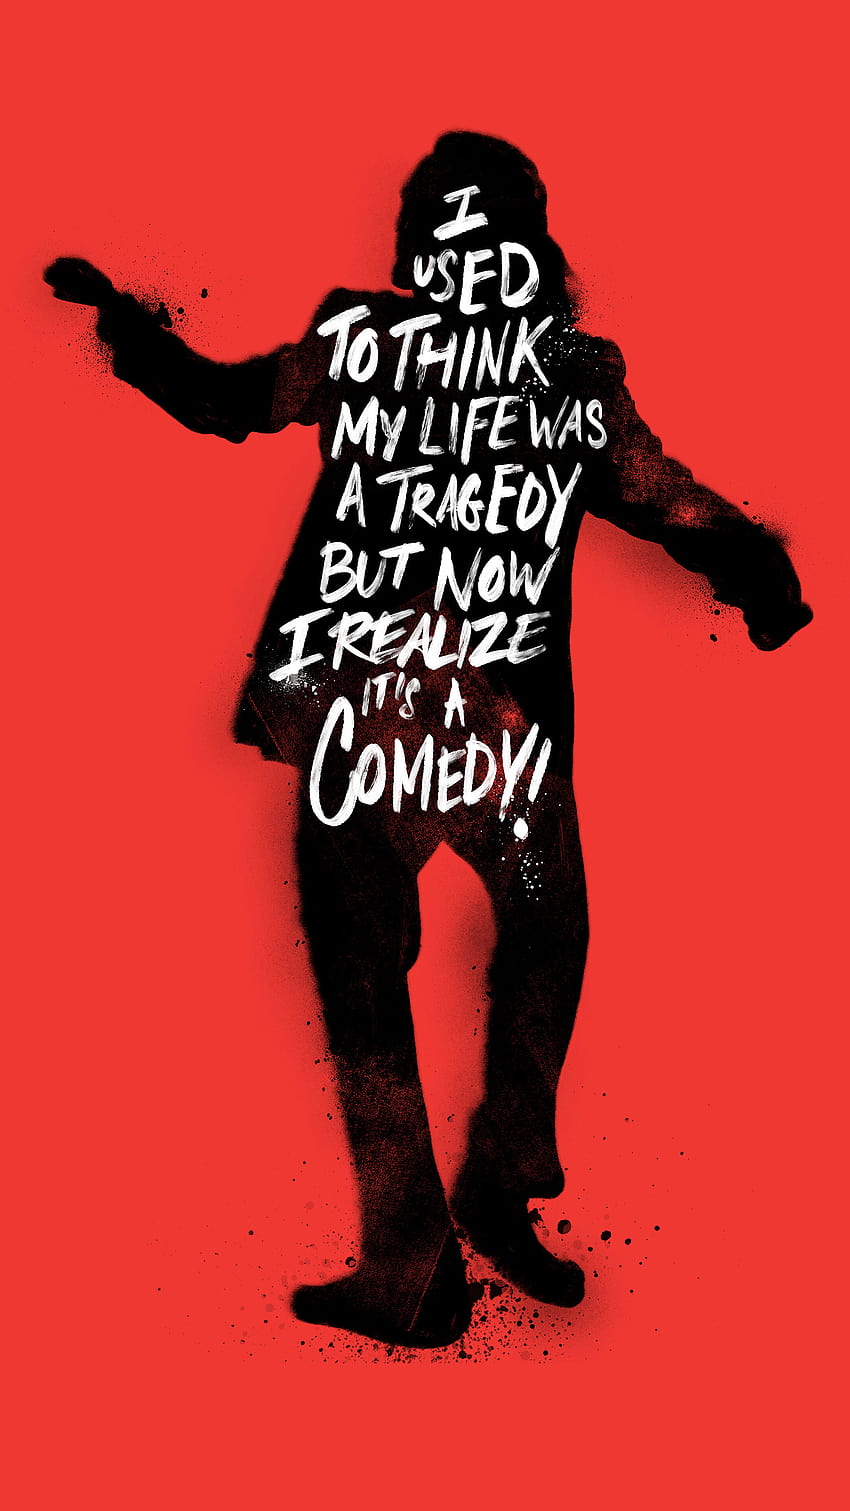 Joker 2019 Movie Quote on Inspirationde, film quotes HD phone wallpaper